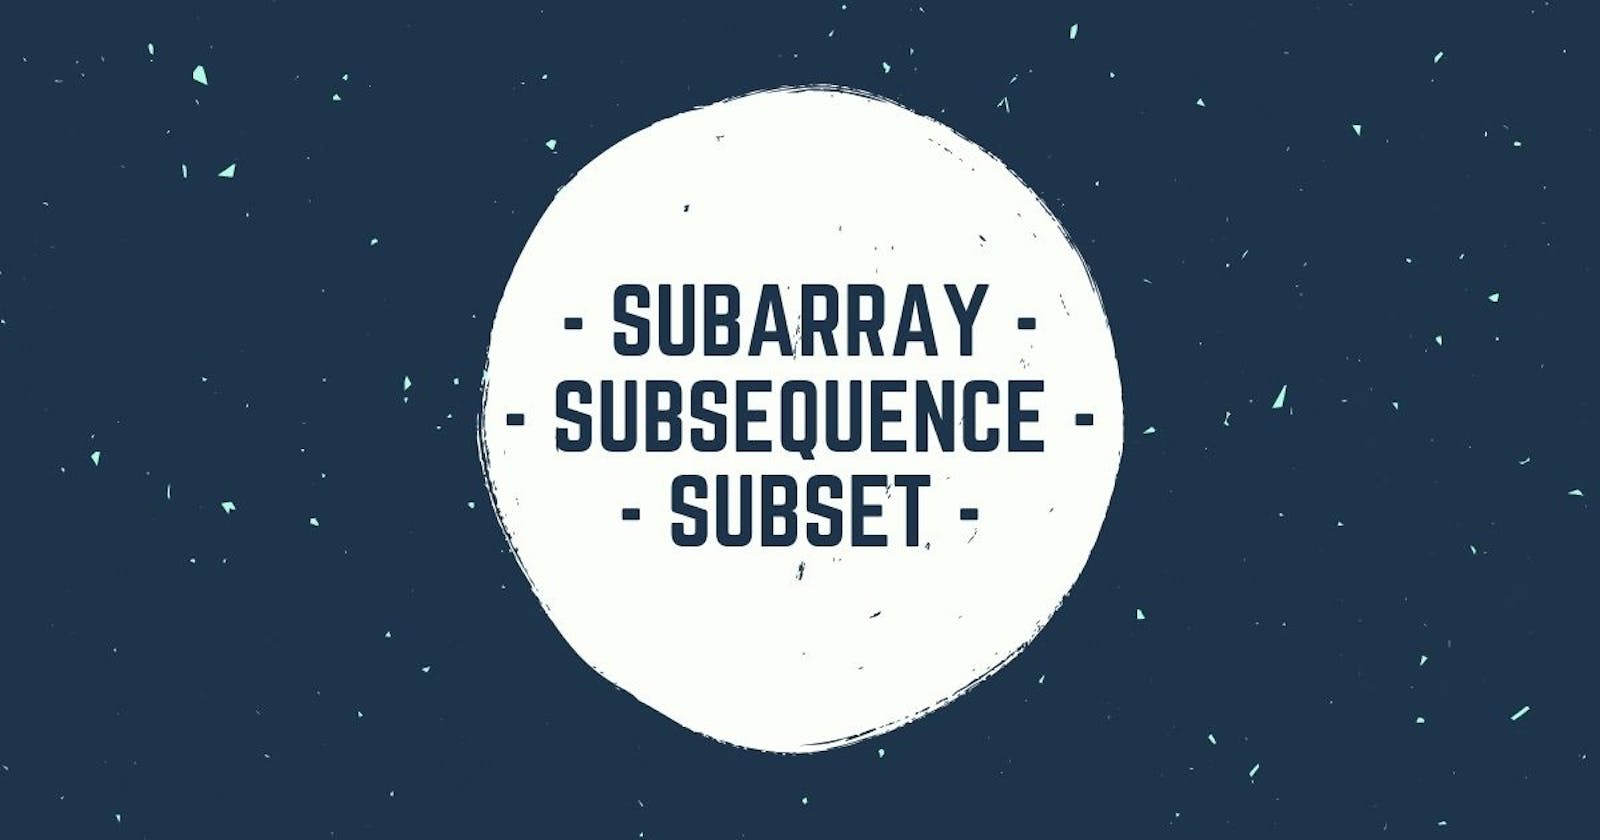 Subarray, Subsequence, Subset? - The difference.